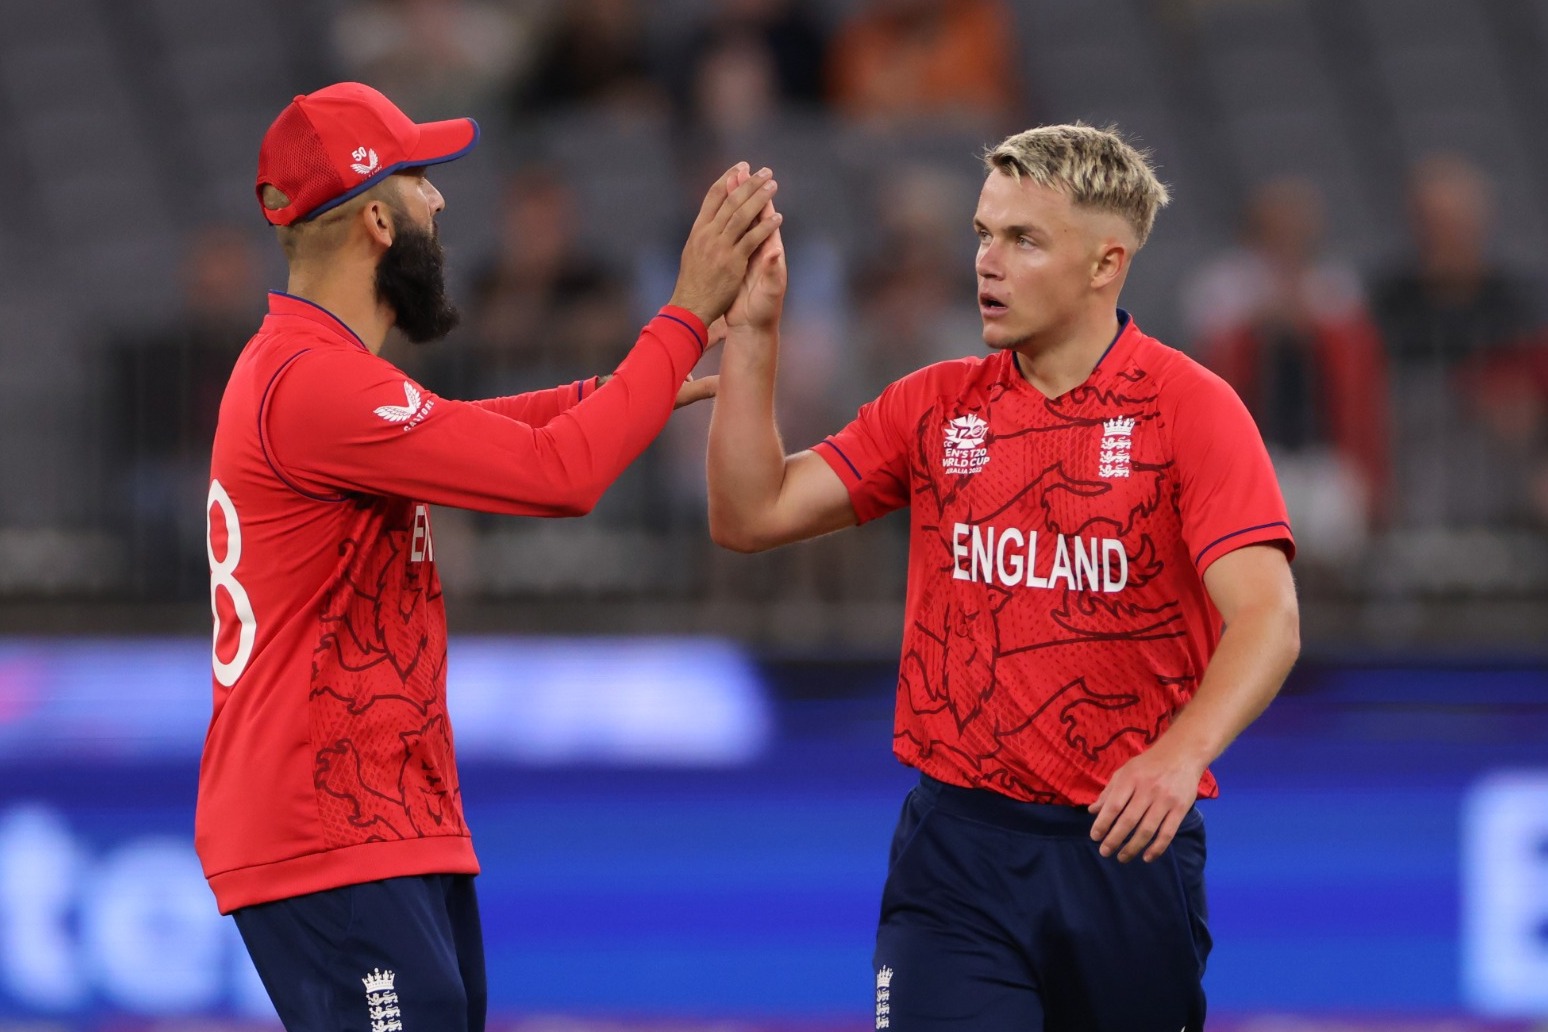 ‘Best is yet to come’ from England, says Moeen Ali ahead of T20 World Cup semi 